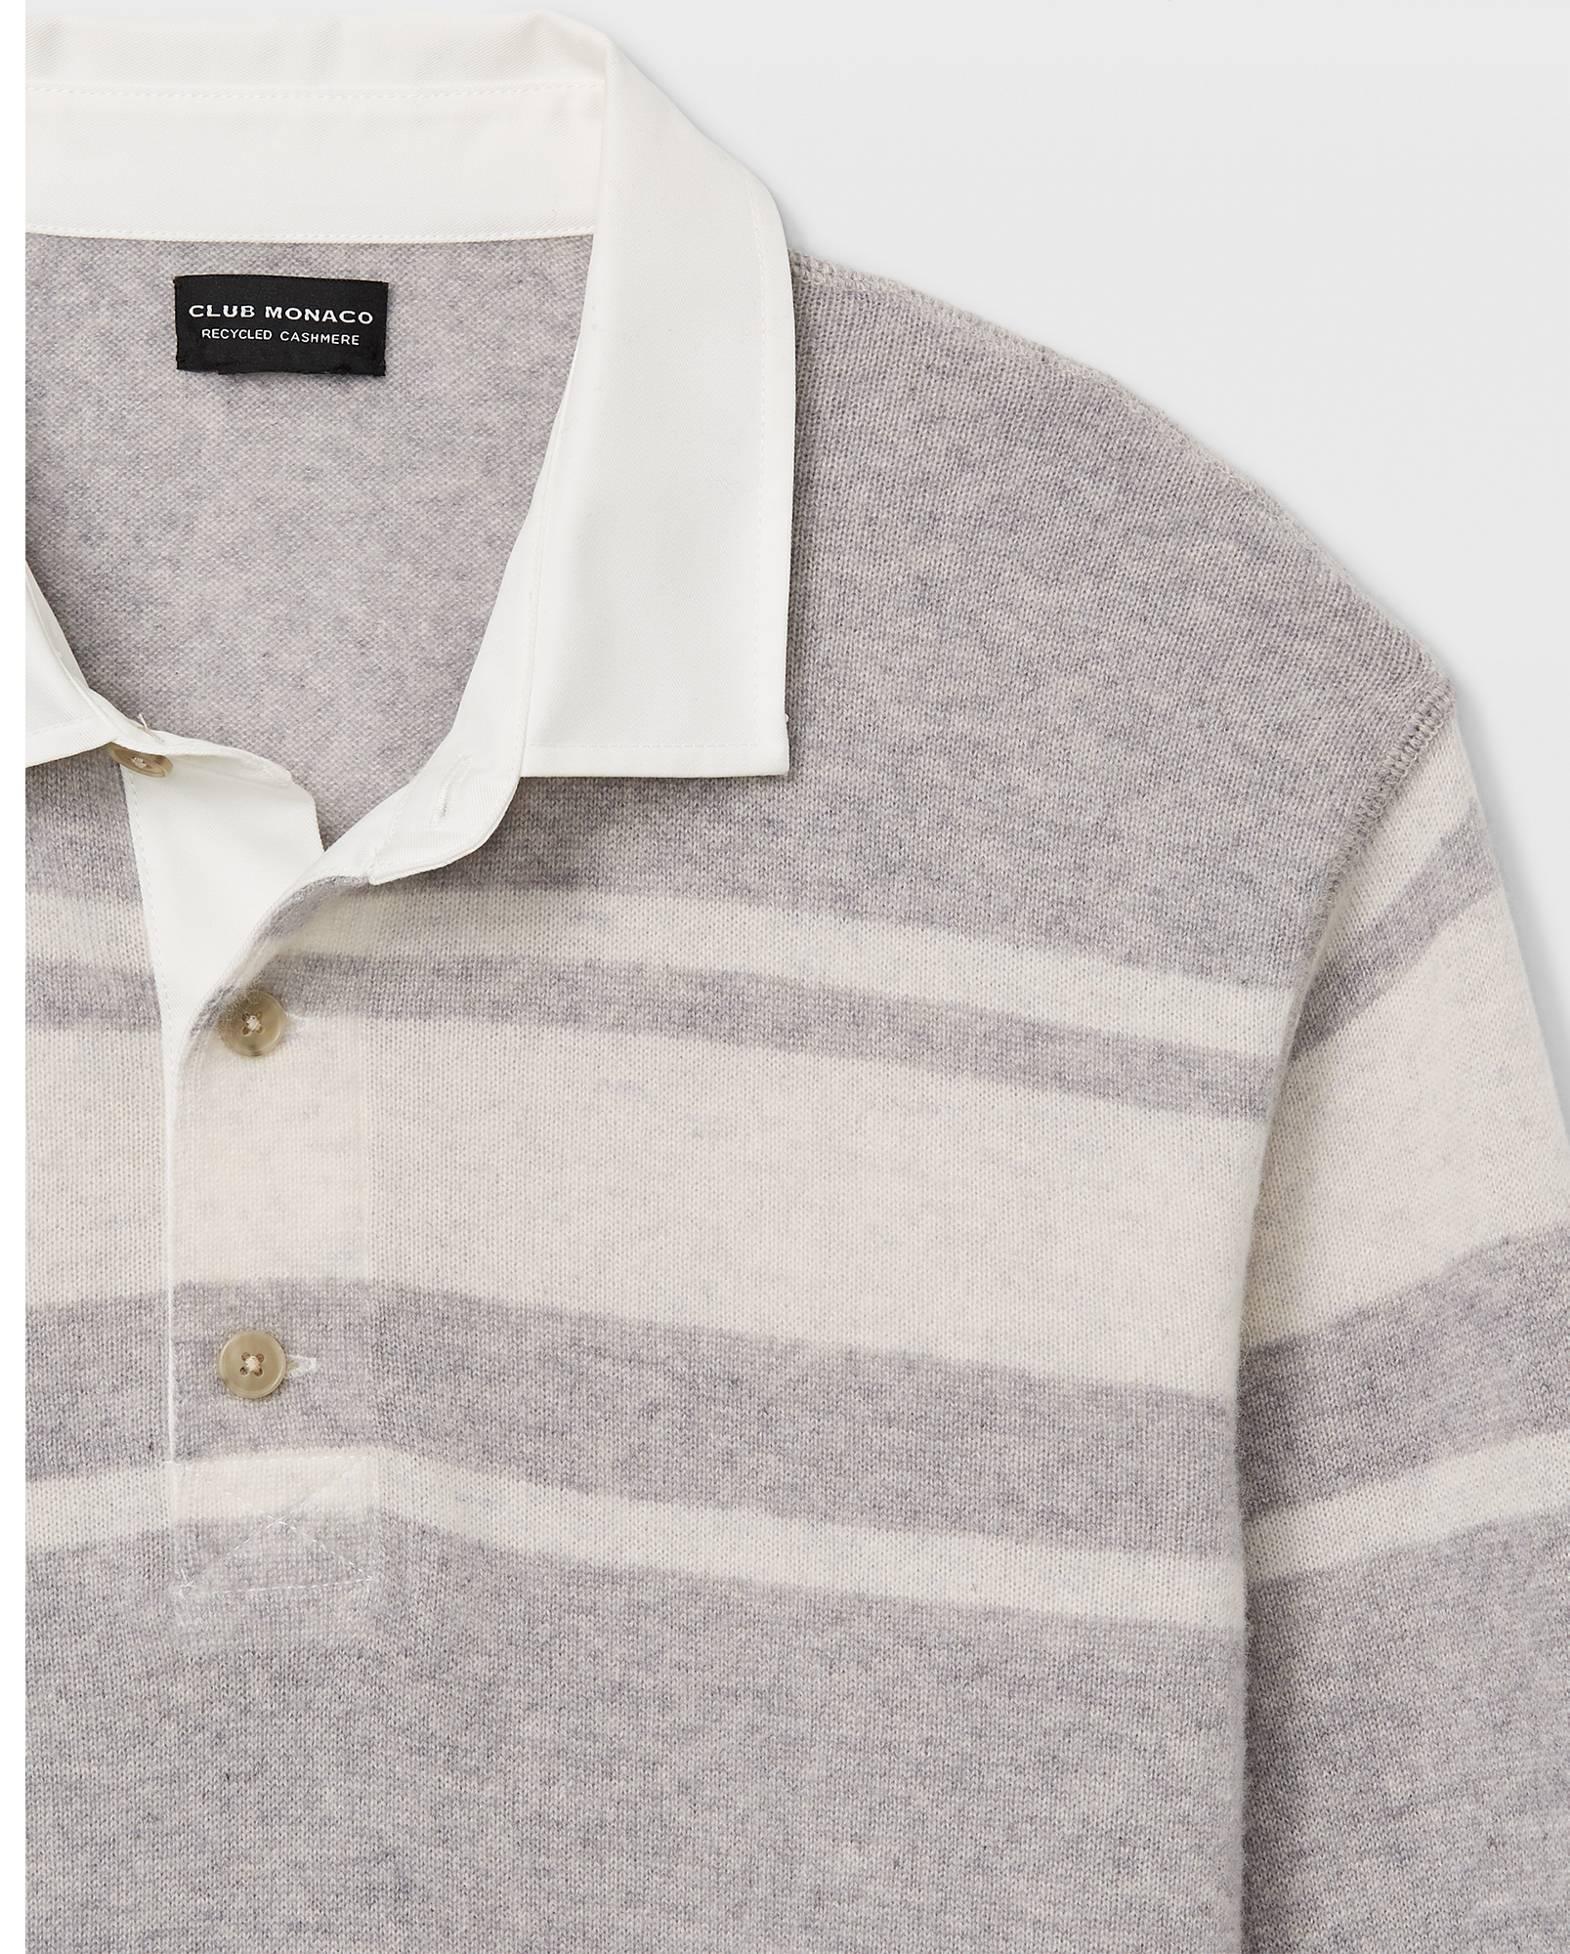 Club Monaco Cashmere Grey Stripe Long Sleeve Striped Rugby Sweater in ...